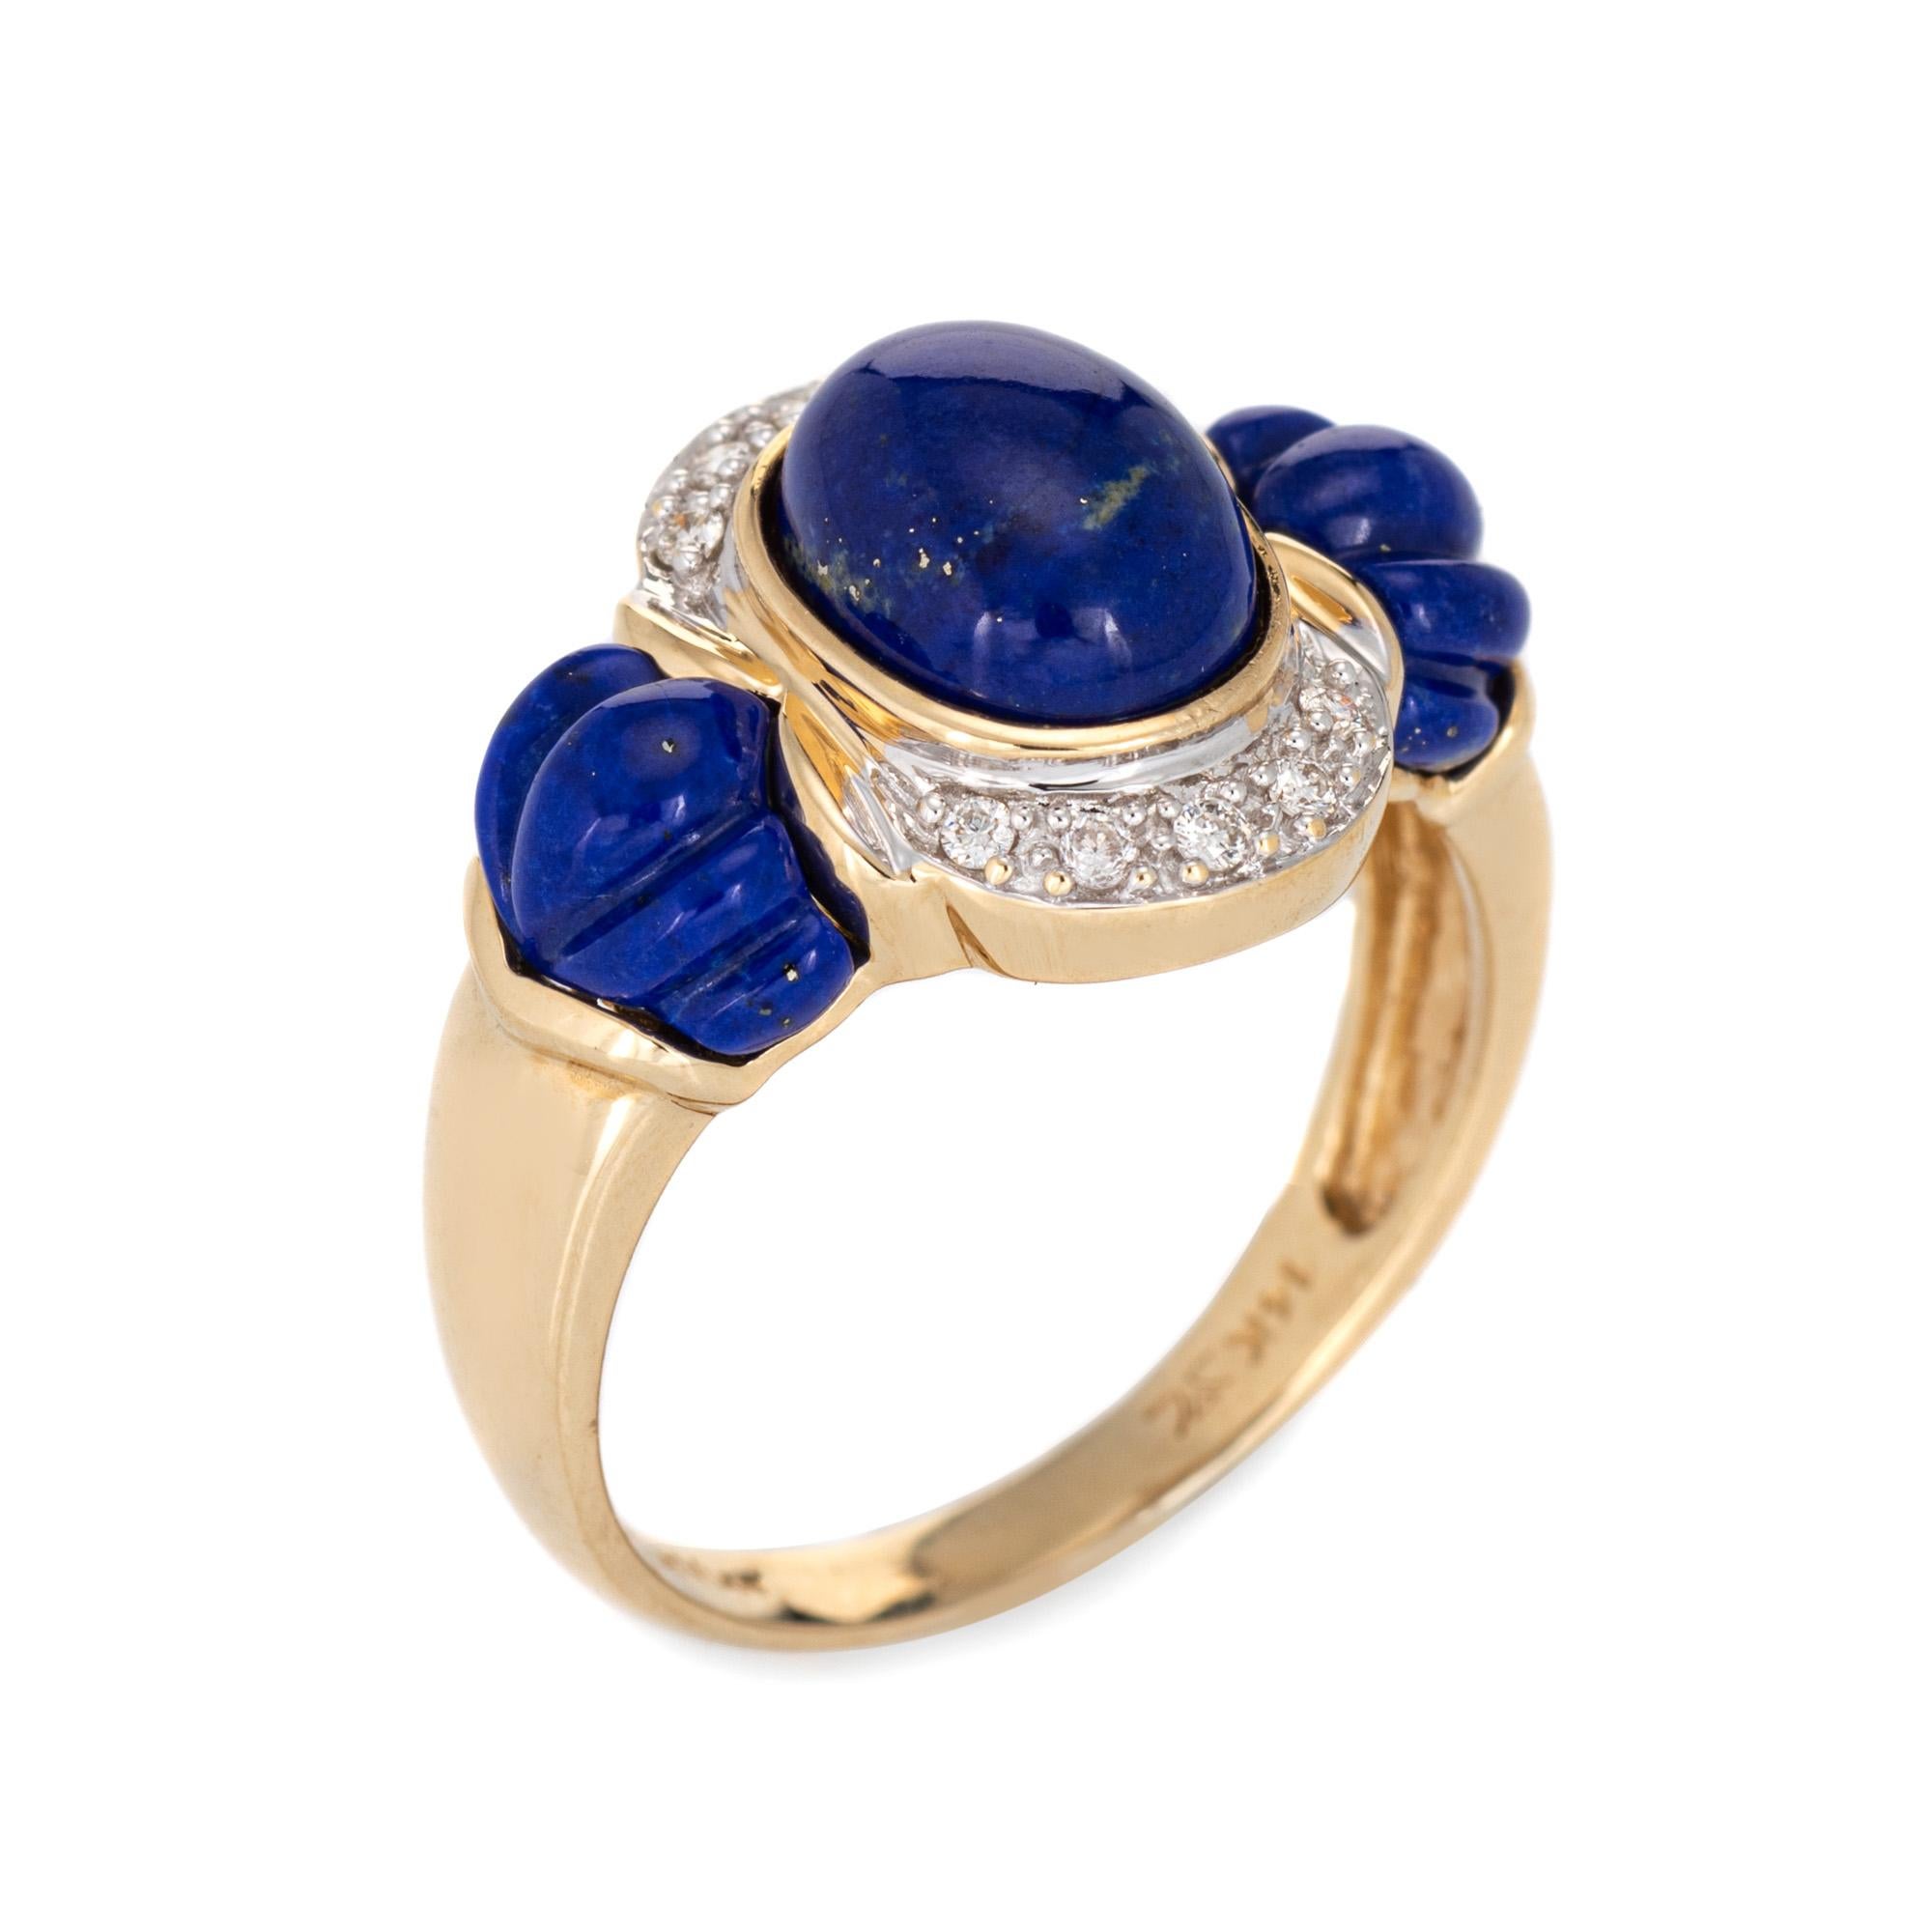 Stylish estate Le Vian lapis lazuli diamond cocktail ring crafted in 14 karat yellow gold. 

Cabochon cut lapis lazuli measures 8mm x 6mm with fluted lapis lazuli to the side shoulders (7mm x 5mm). Diamonds total an estimated 0.10 carat (estimated